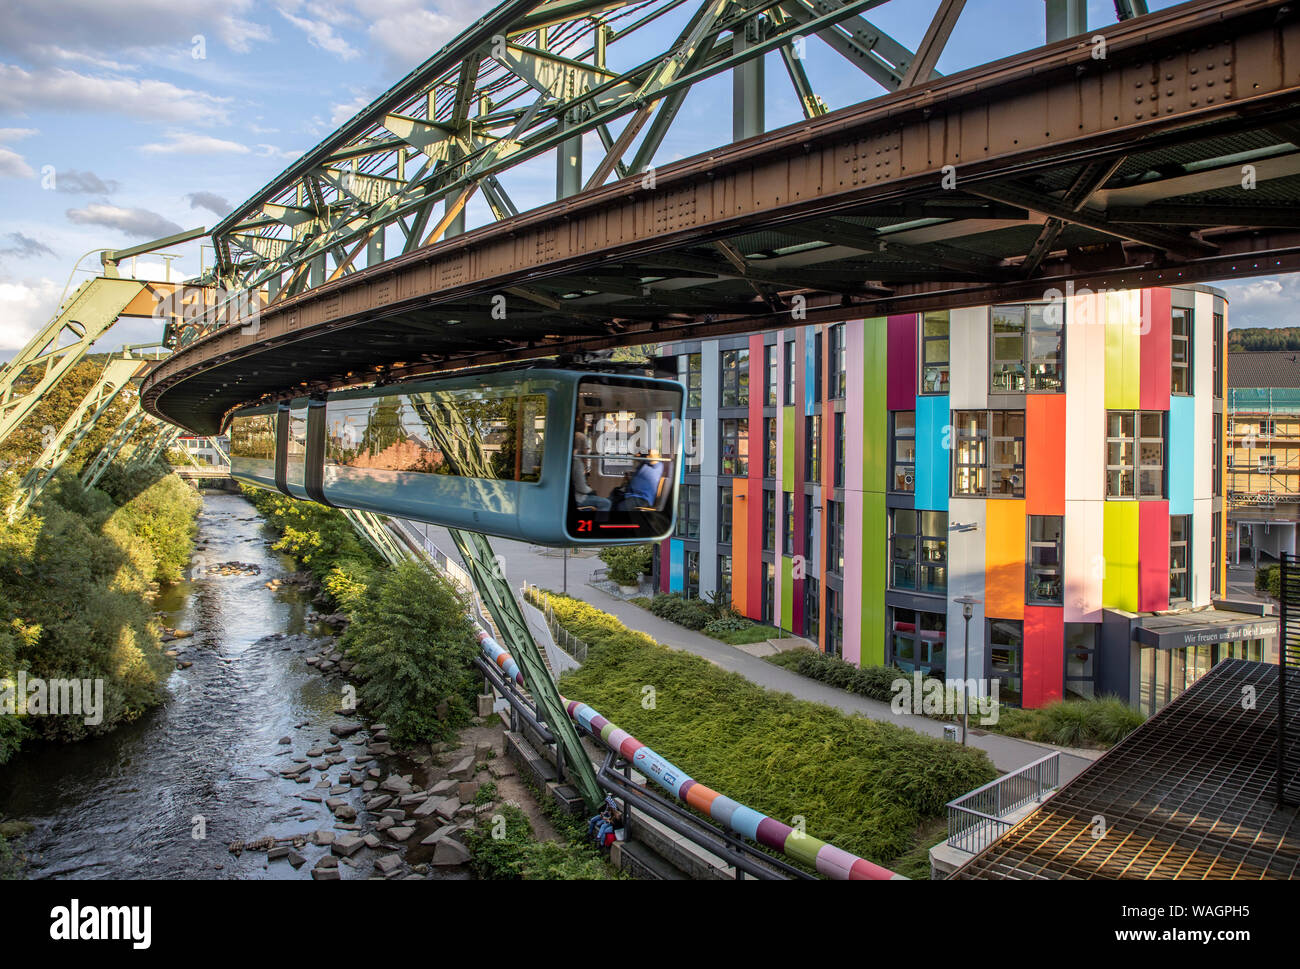 The Wuppertal suspension railway, train of the latest generation 15, Wuppertal, Germany, over river Wupper, Junior Uni, Junior University, Stock Photo